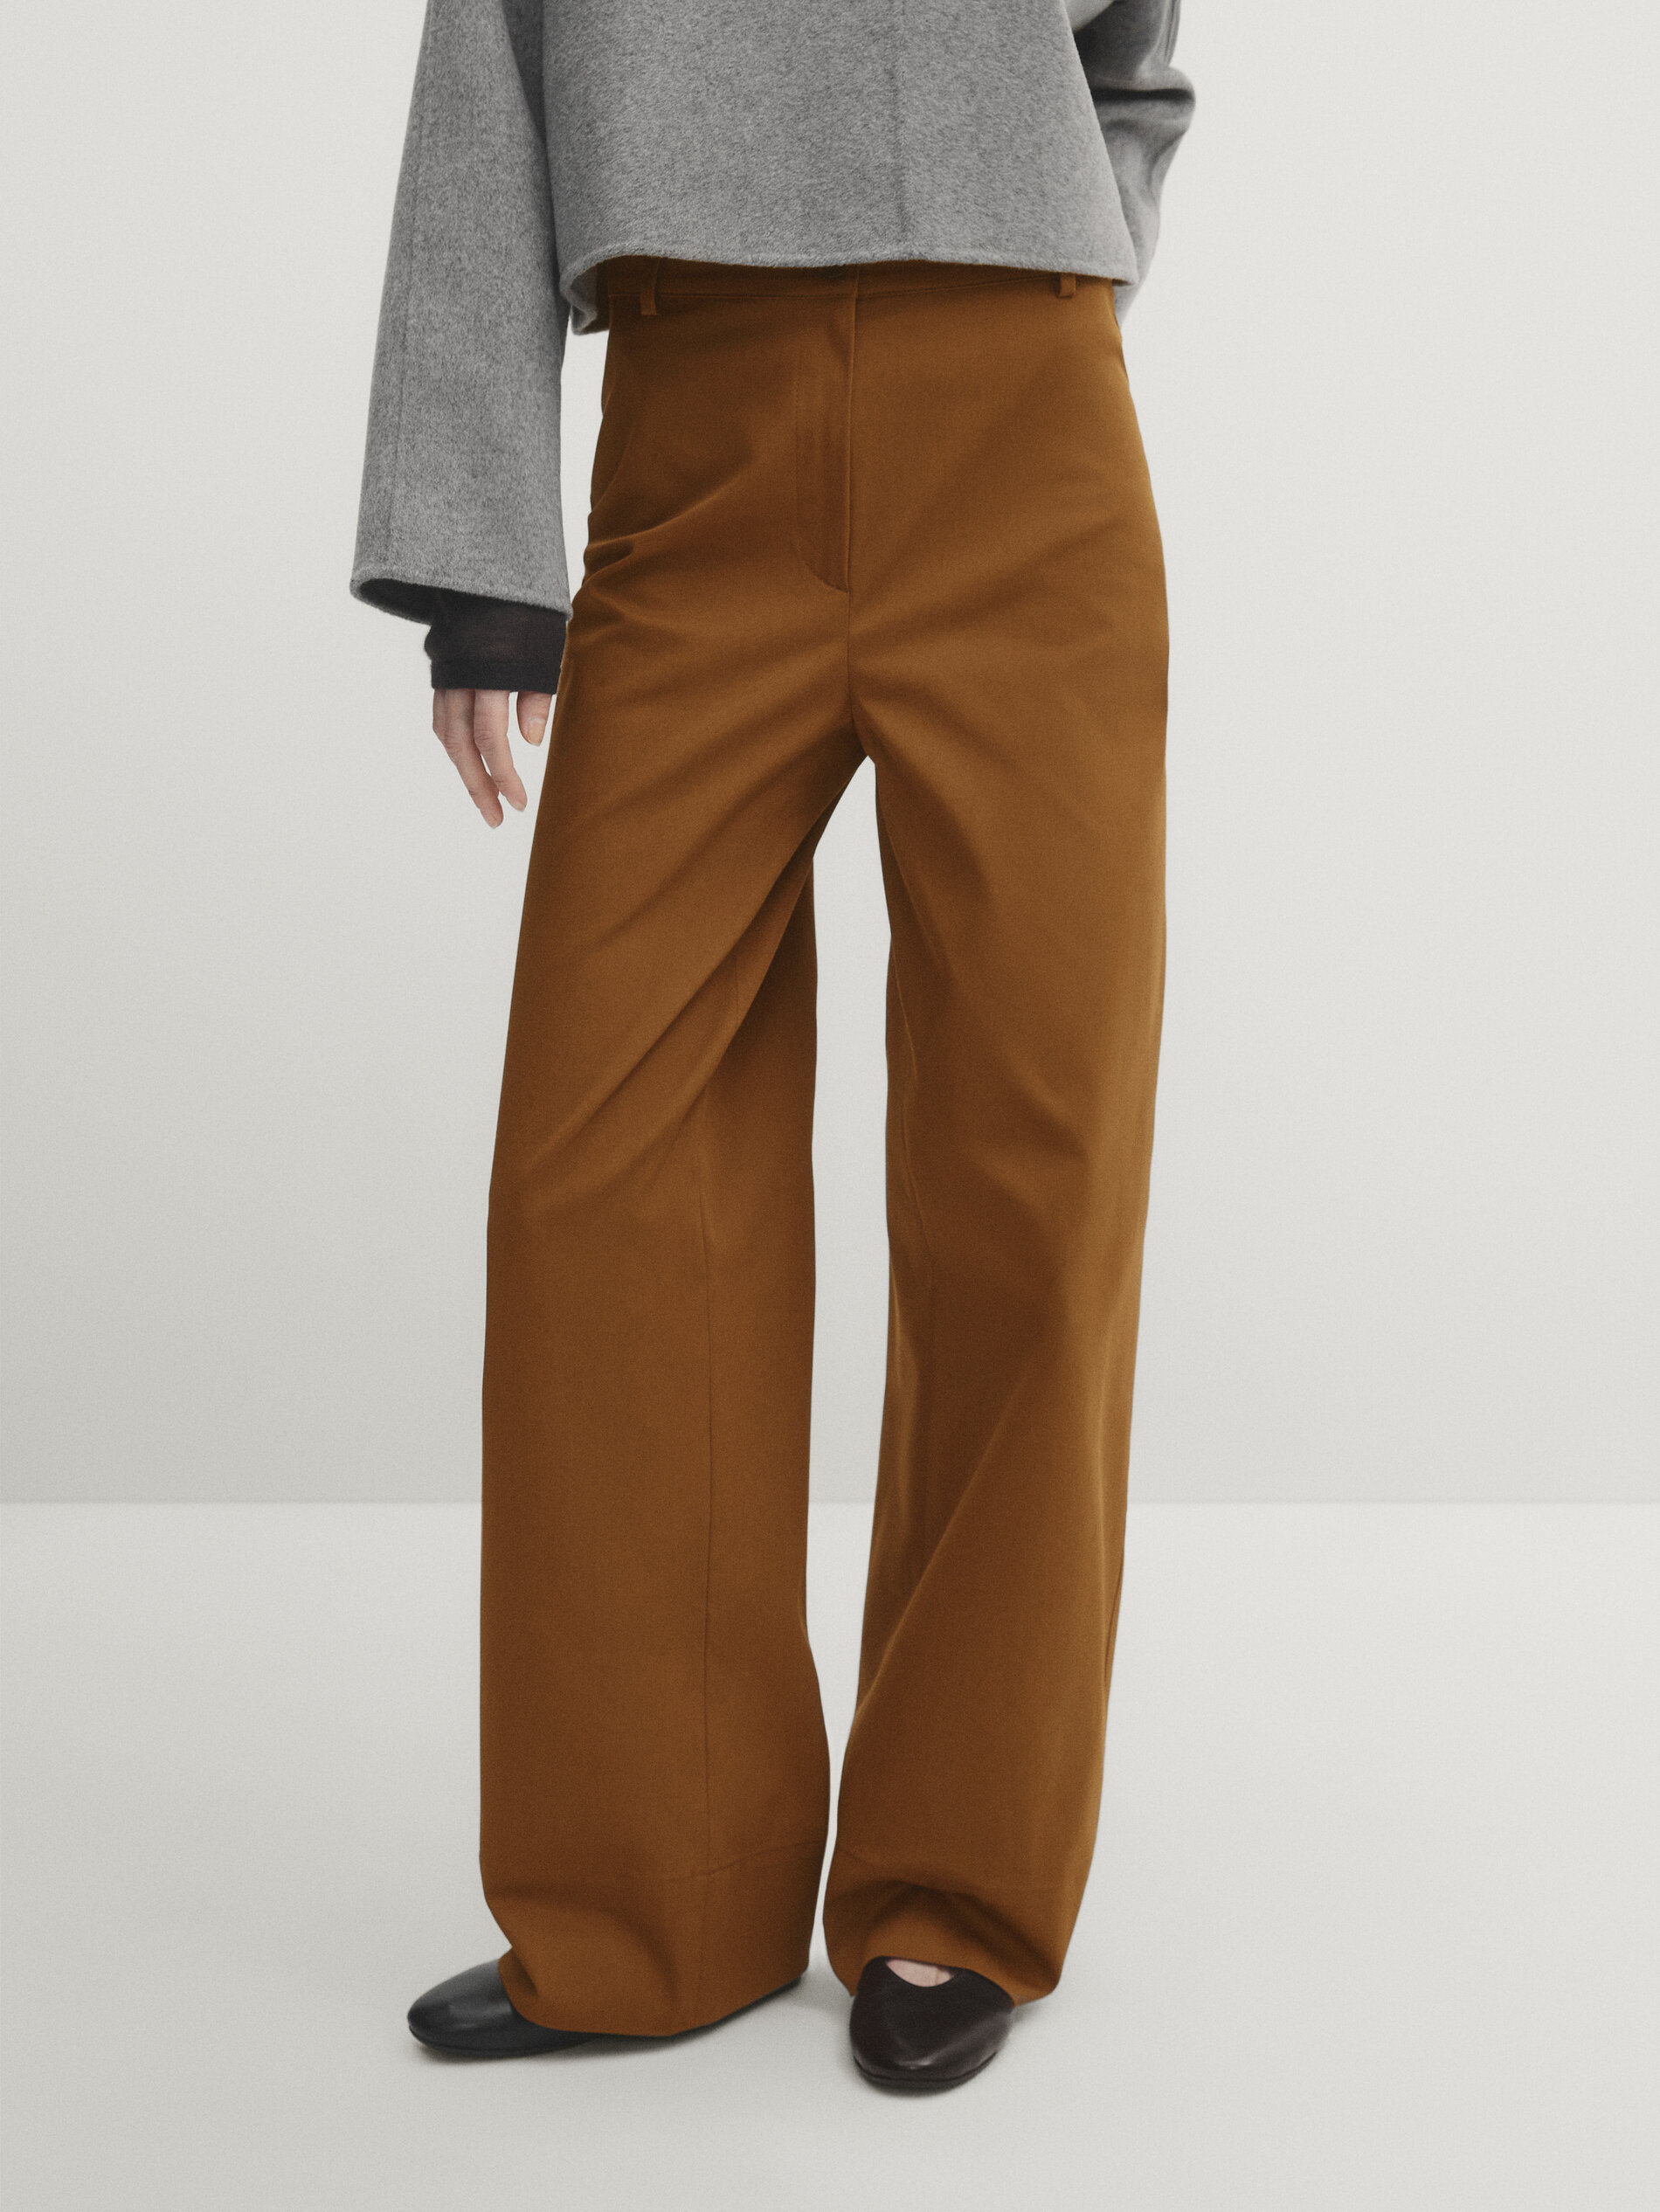 90s Straight Coated Trousers - Black - Ladies | H&M IN